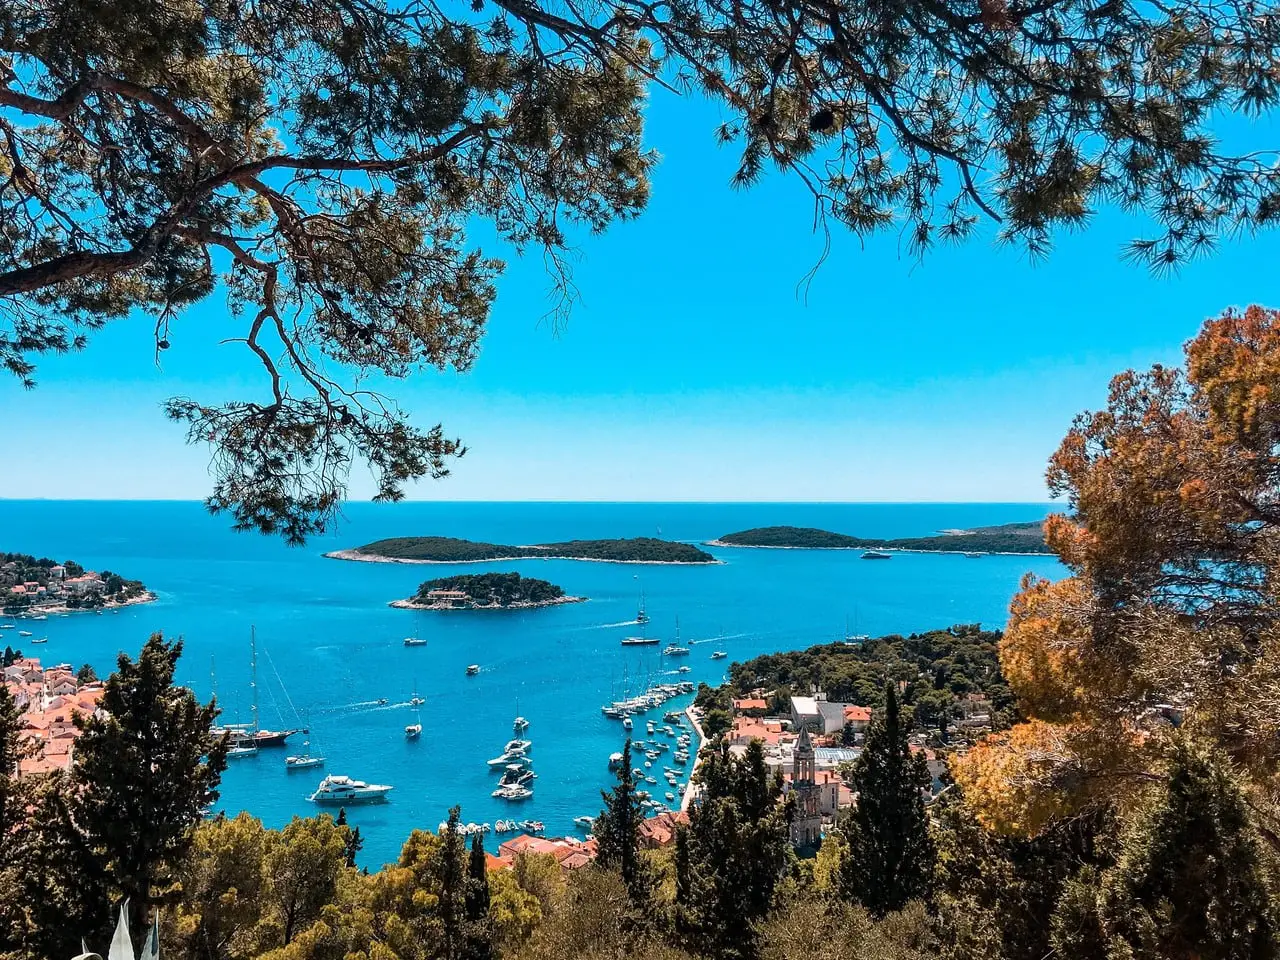 The view from the Hvar Fortress on a day trip from Split to Hvar